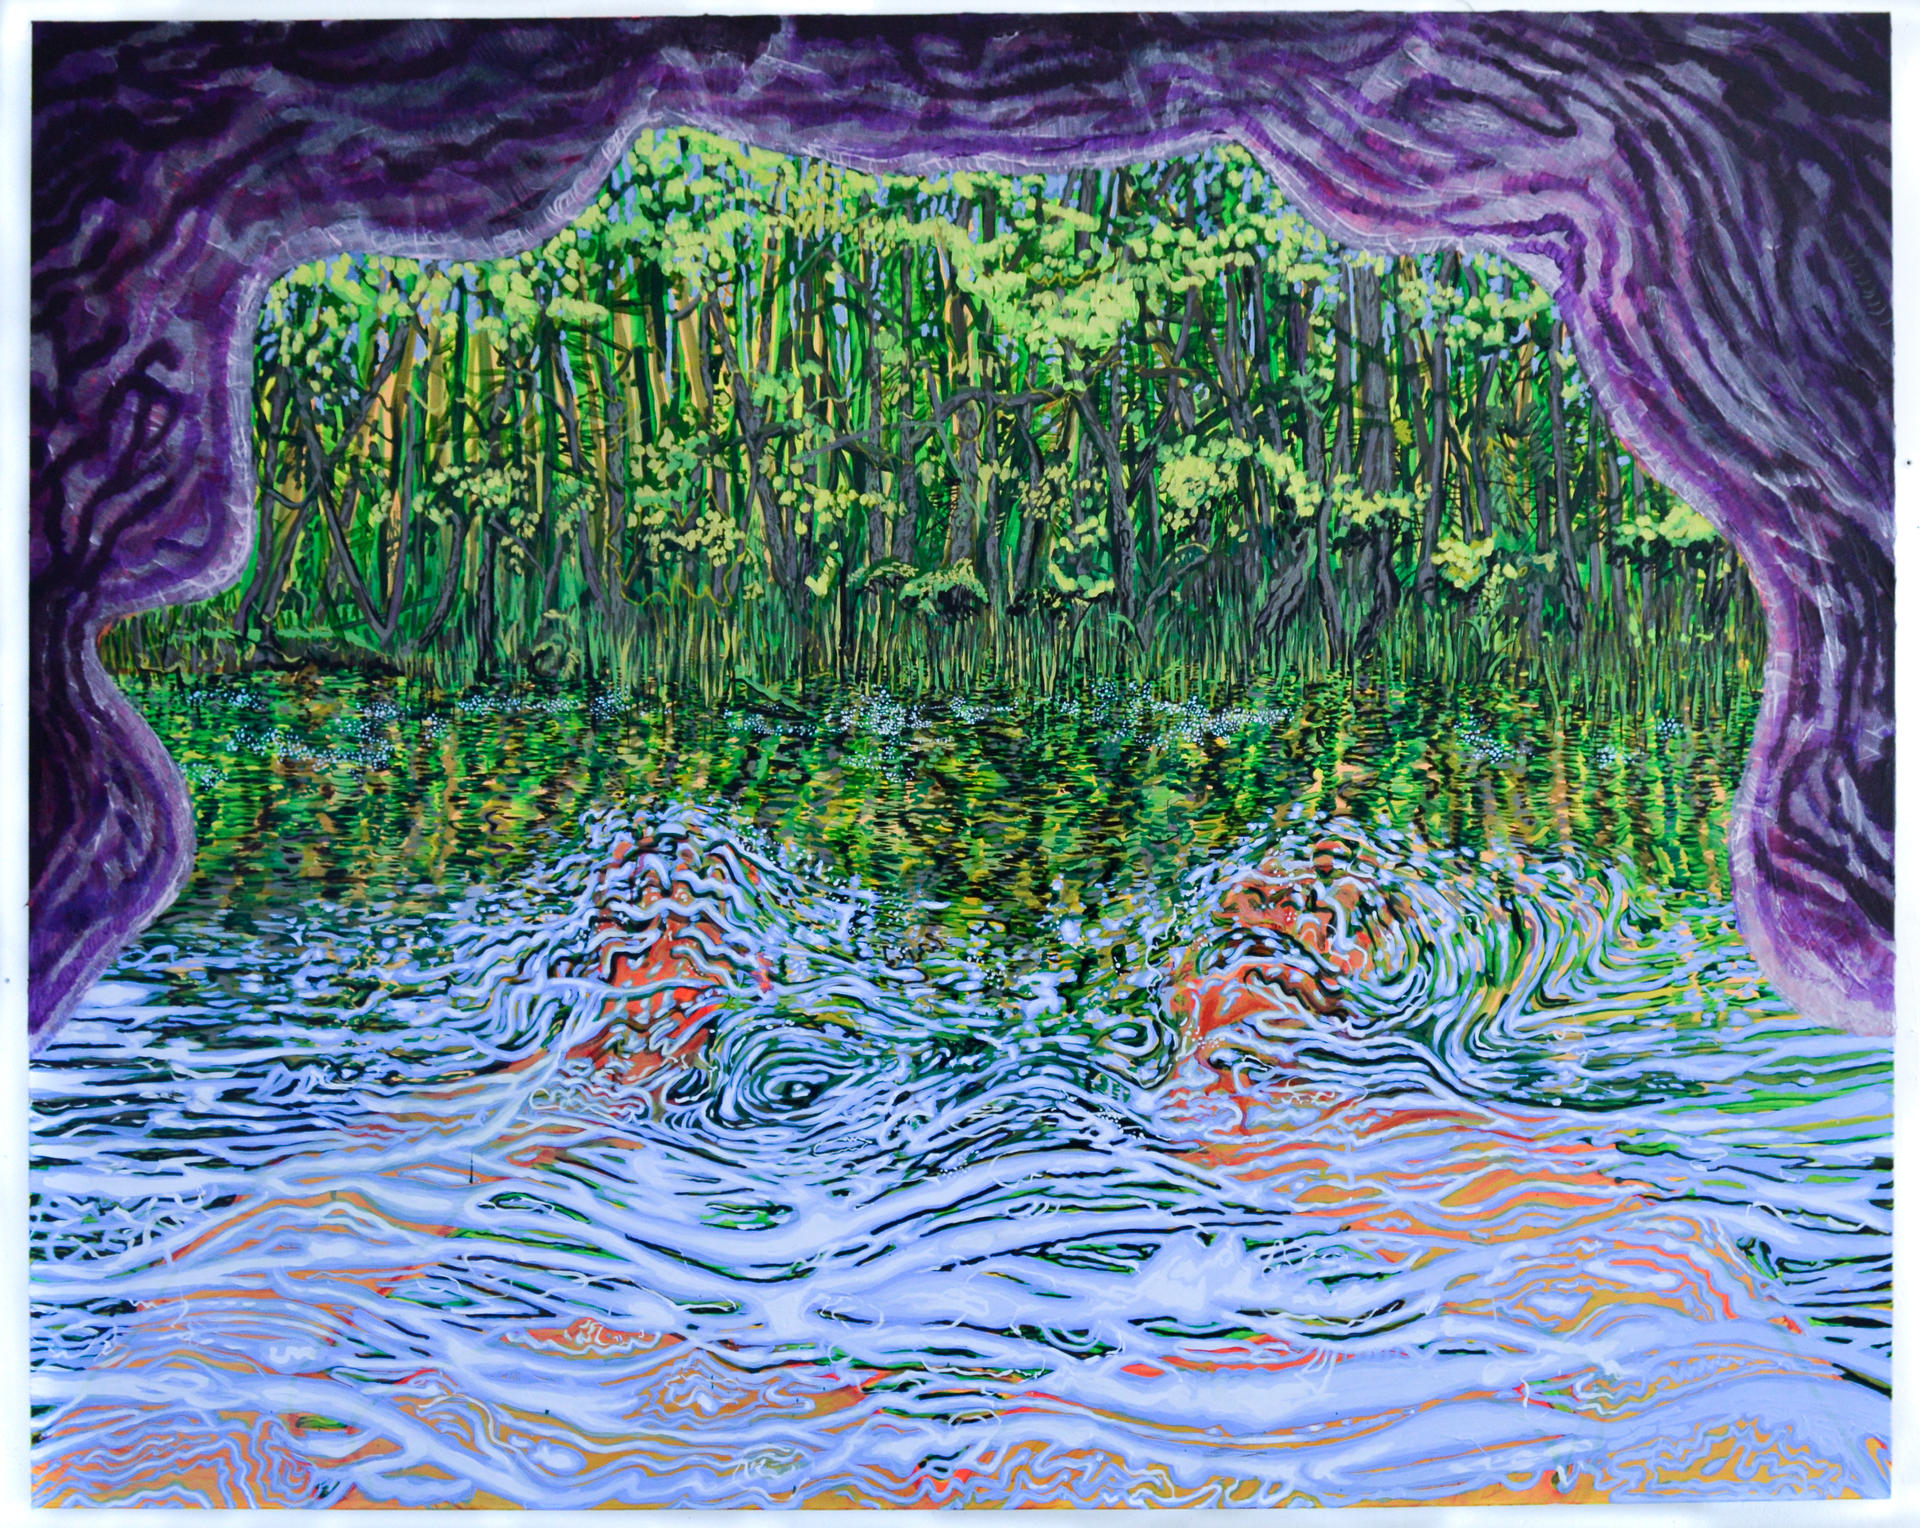 A painting of a first person perspective swimming in water